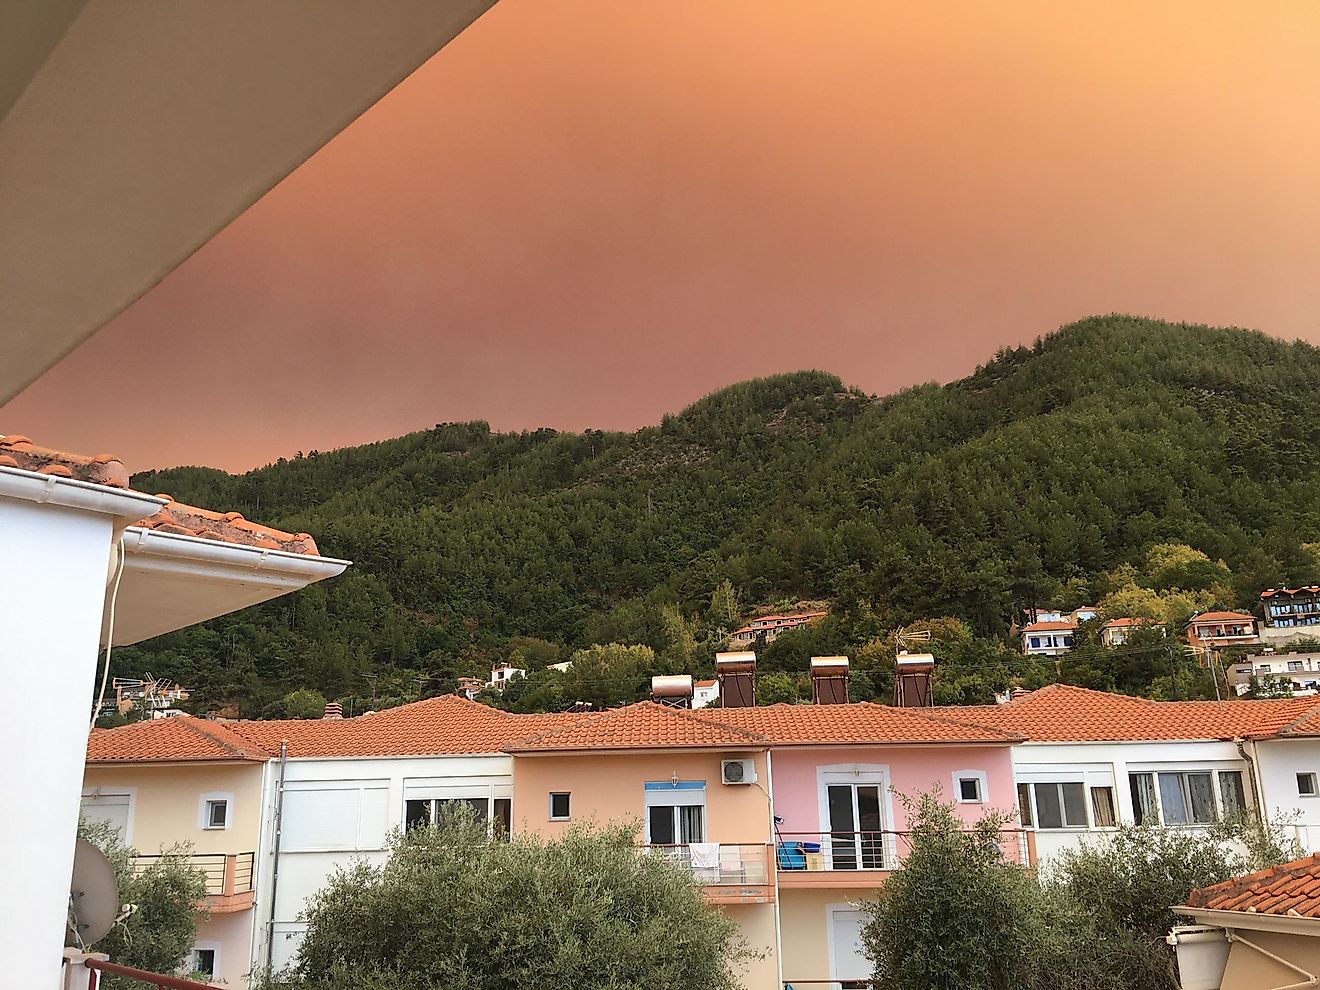 Smoke from the wildfires in Greece rolls over the hills of Skala Potamias, on the island of Thassos. Photo: Andrew Douglas